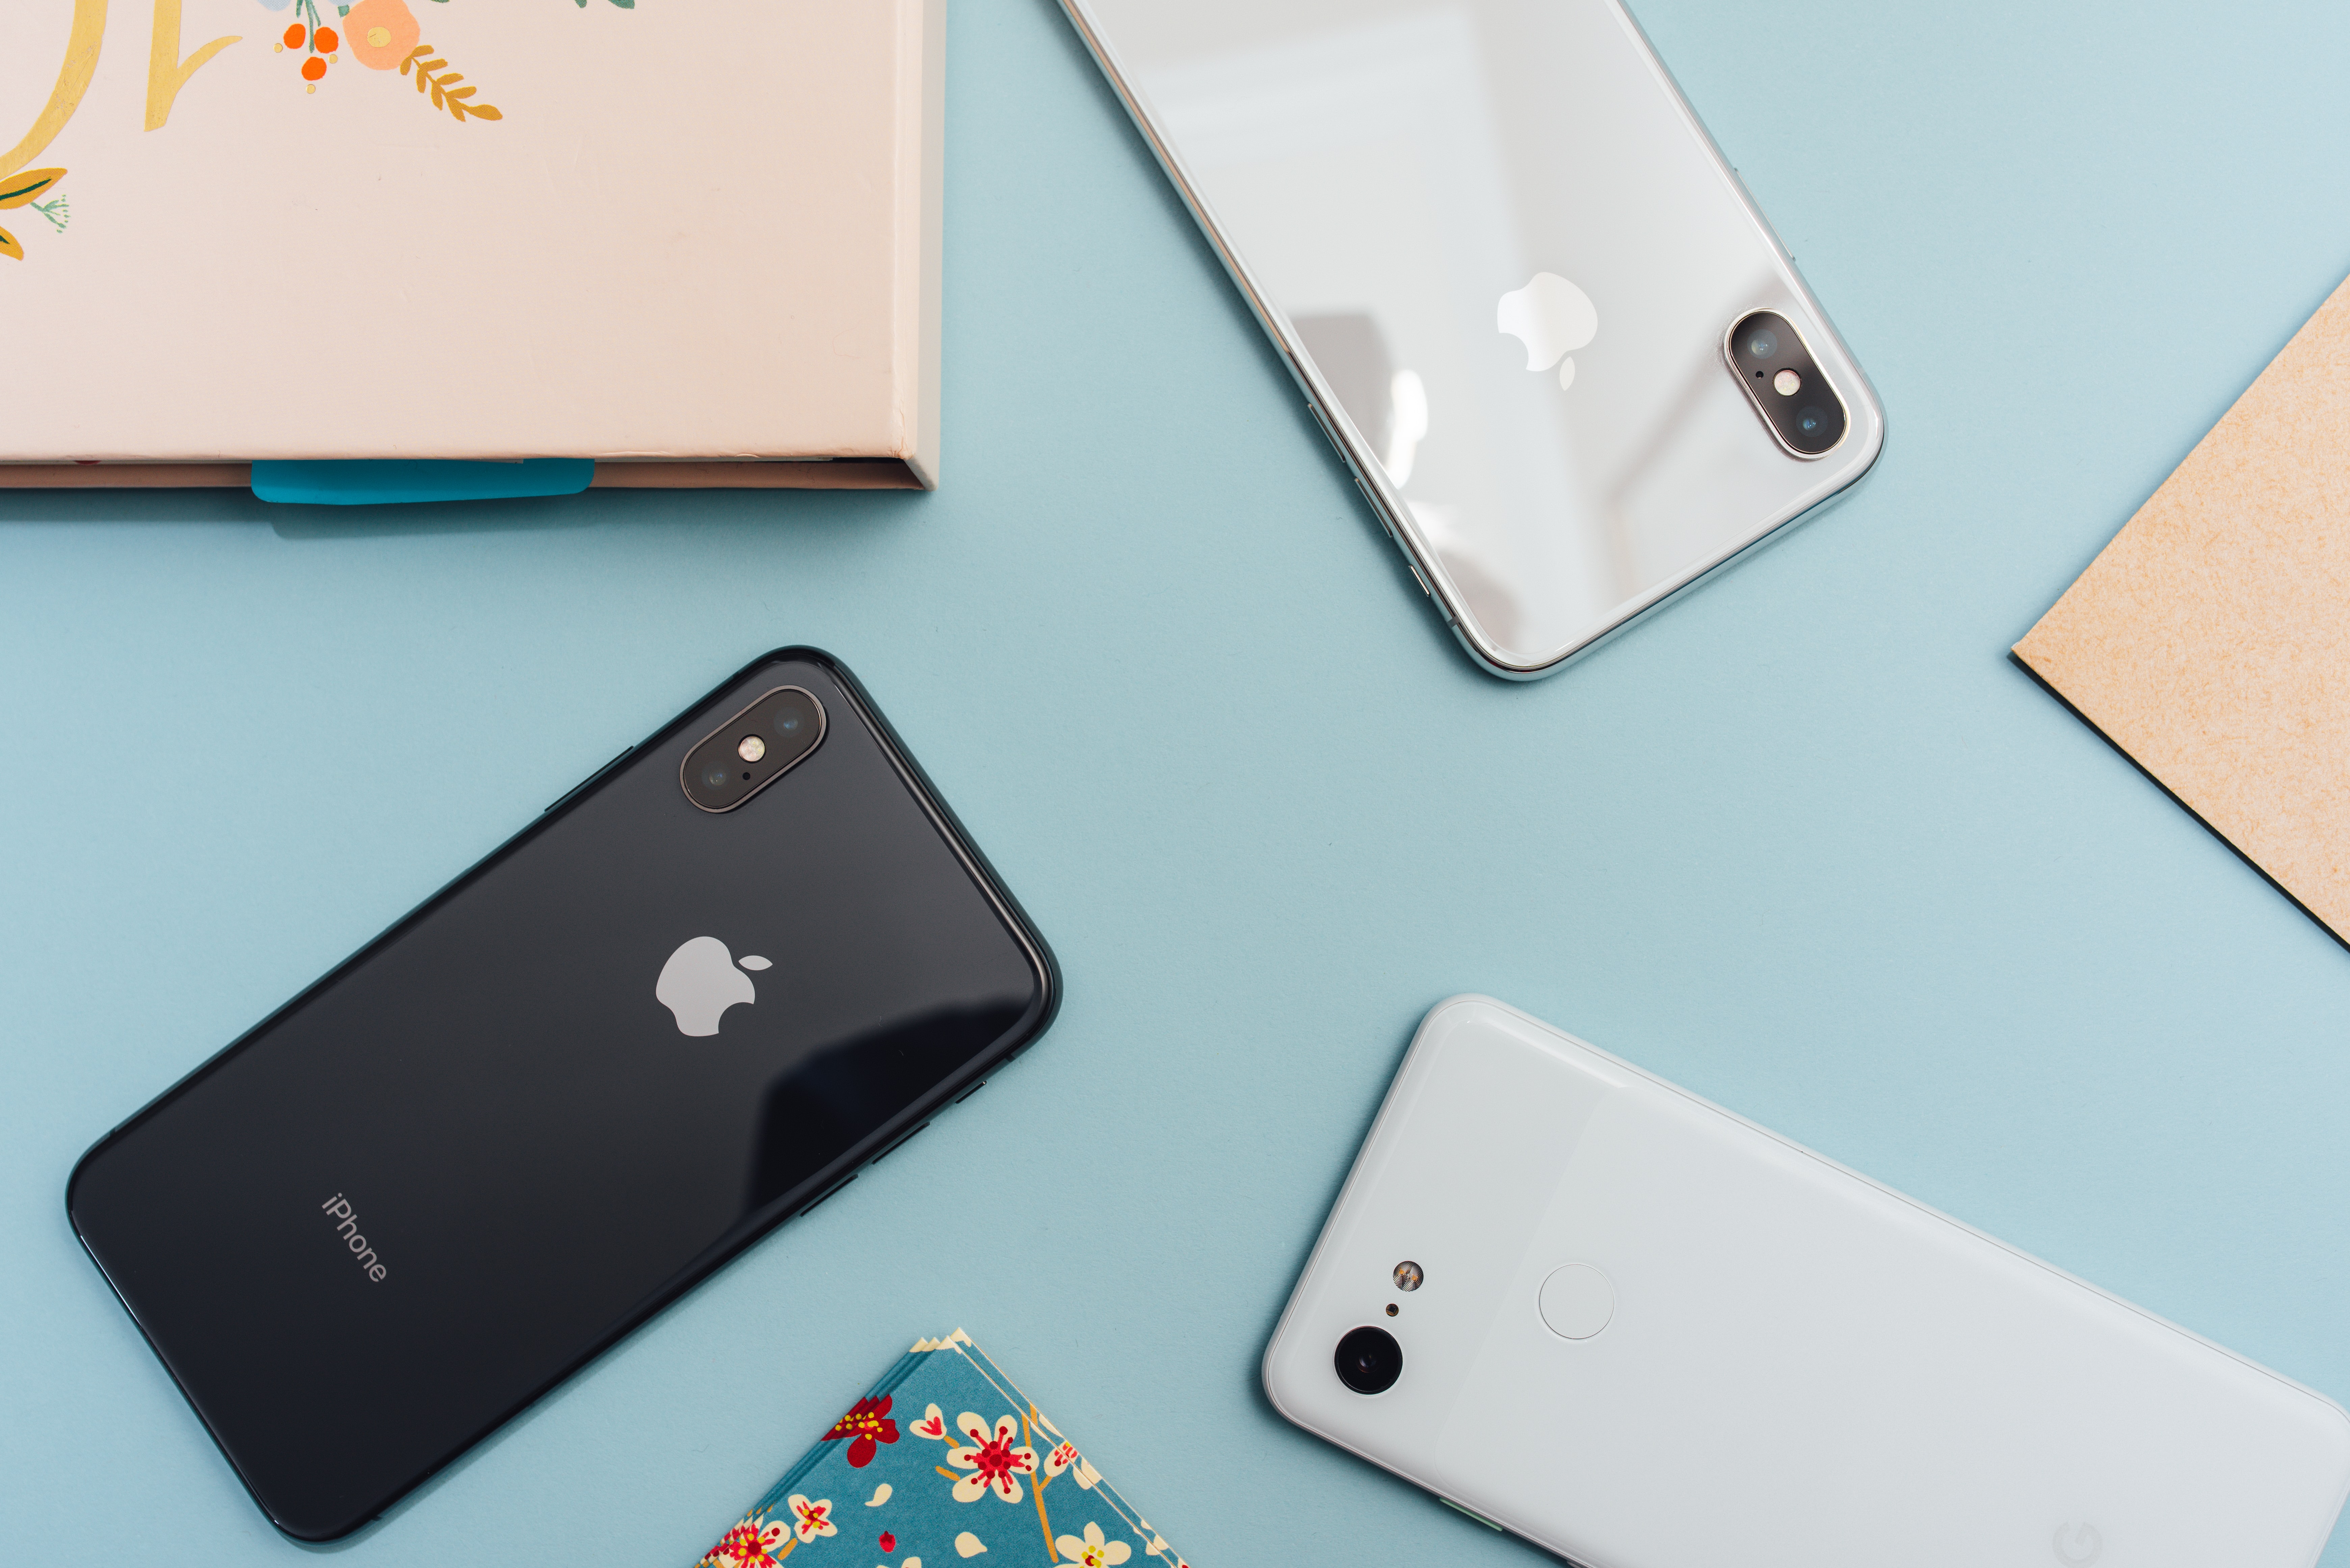 A selection of iPhones